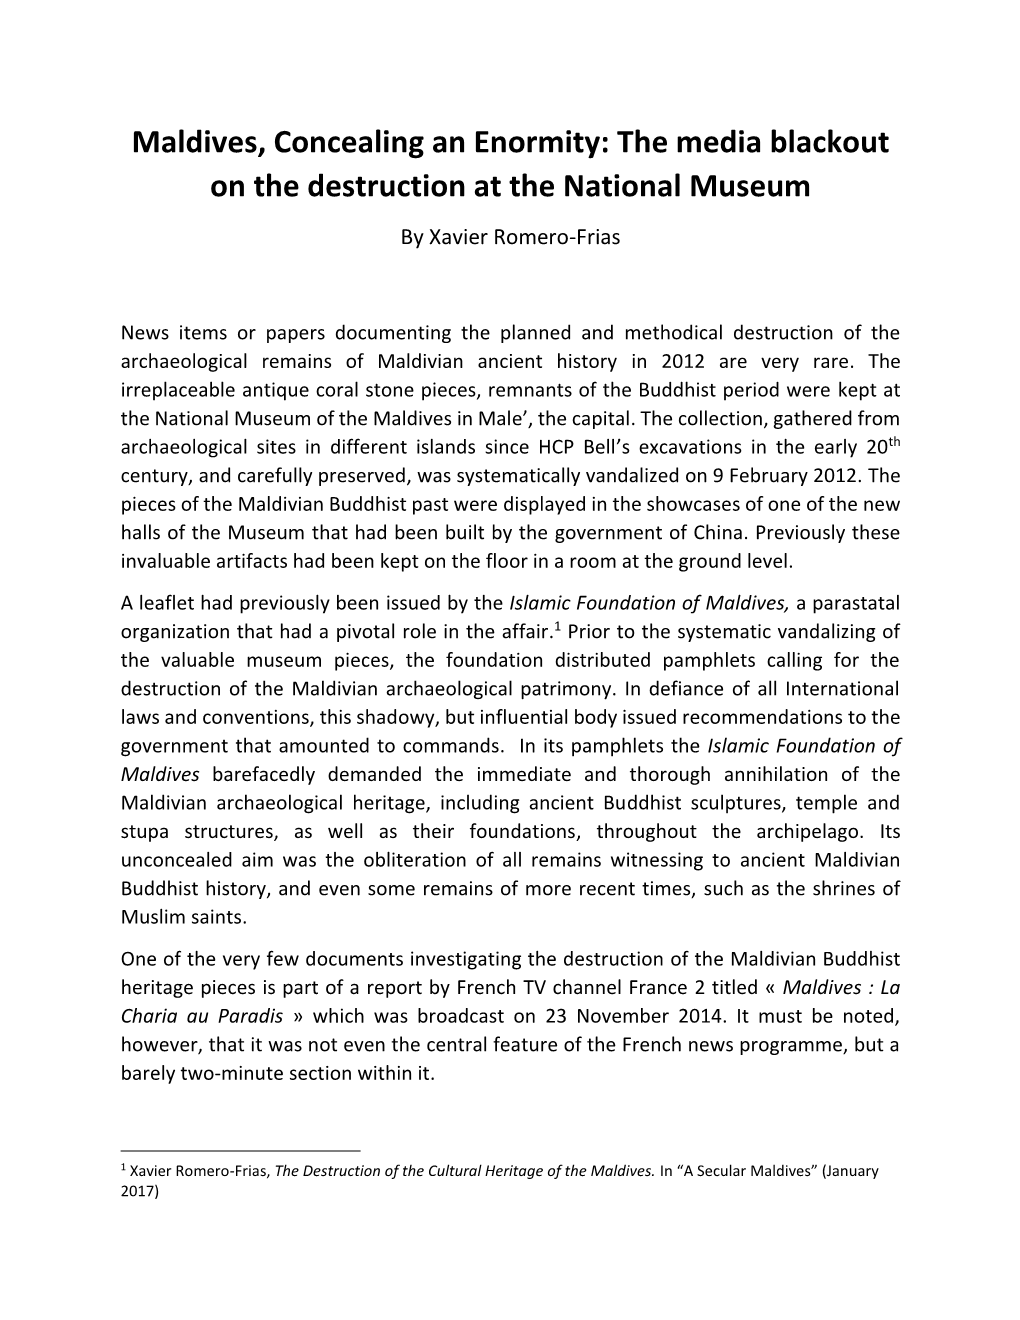 Maldives, Concealing an Enormity: the Media Blackout on the Destruction at the National Museum by Xavier Romero-Frias